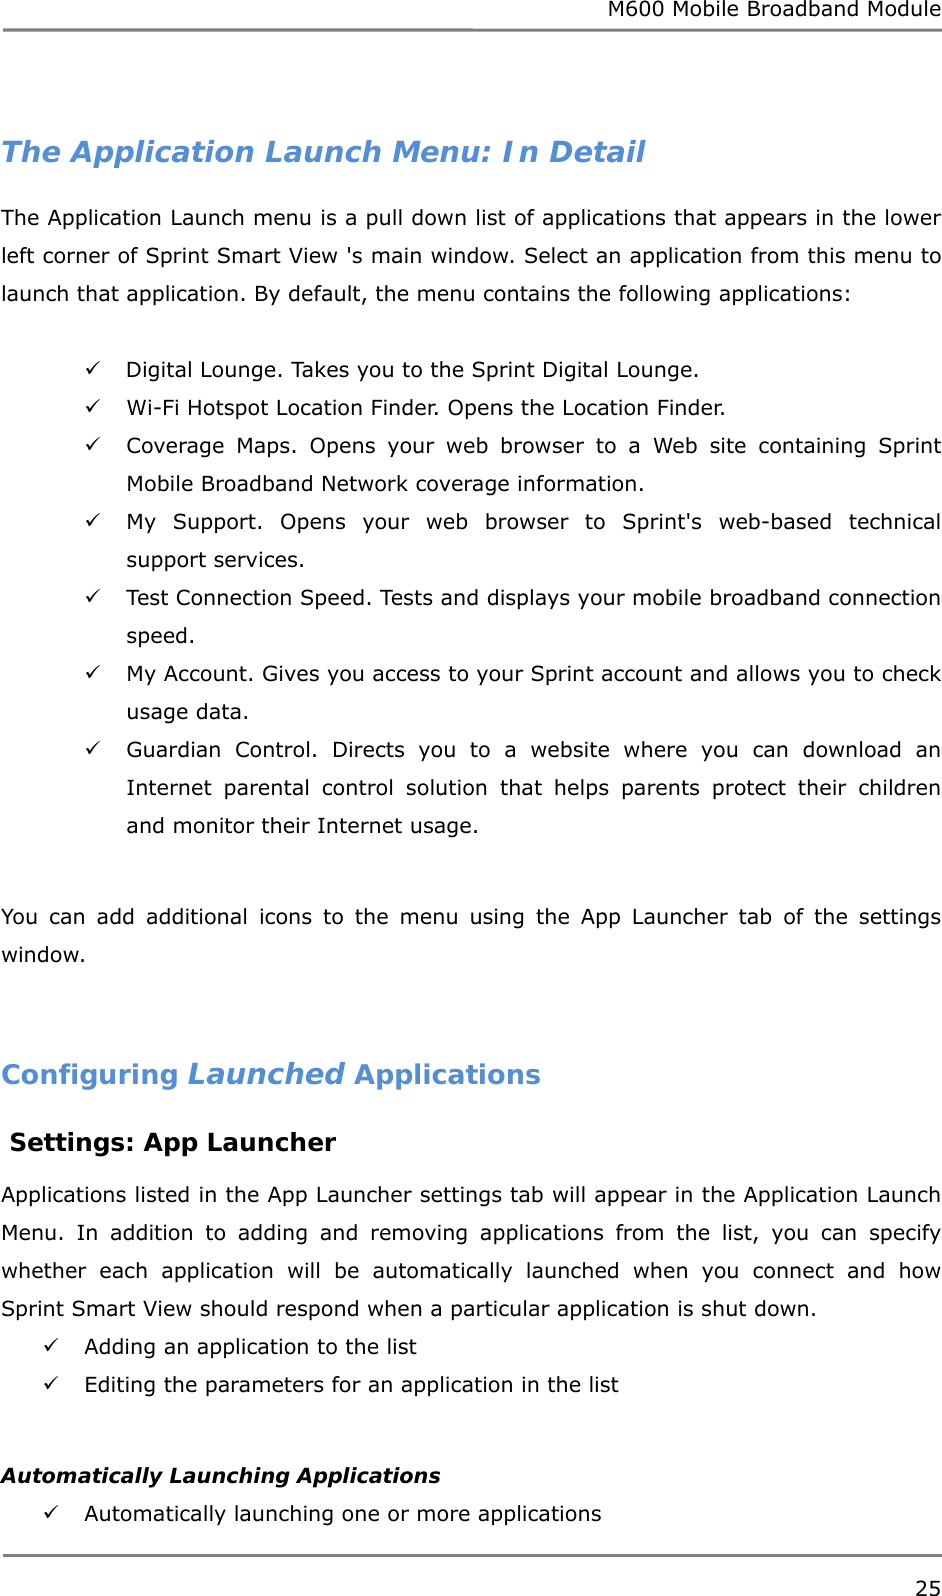 M600 Mobile Broadband Module 25   The Application Launch Menu: In Detail The Application Launch menu is a pull down list of applications that appears in the lower left corner of Sprint Smart View &apos;s main window. Select an application from this menu to launch that application. By default, the menu contains the following applications:   Digital Lounge. Takes you to the Sprint Digital Lounge.  Wi-Fi Hotspot Location Finder. Opens the Location Finder.  Coverage Maps. Opens your web browser to a Web site containing Sprint Mobile Broadband Network coverage information.  My Support. Opens your web browser to Sprint&apos;s web-based technical support services.  Test Connection Speed. Tests and displays your mobile broadband connection speed.  My Account. Gives you access to your Sprint account and allows you to check usage data.  Guardian Control. Directs you to a website where you can download an Internet parental control solution that helps parents protect their children and monitor their Internet usage.  You can add additional icons to the menu using the App Launcher tab of the settings window.   Configuring Launched Applications  Settings: App Launcher  Applications listed in the App Launcher settings tab will appear in the Application Launch Menu. In addition to adding and removing applications from the list, you can specify whether each application will be automatically launched when you connect and how Sprint Smart View should respond when a particular application is shut down.  Adding an application to the list   Editing the parameters for an application in the list   Automatically Launching Applications  Automatically launching one or more applications  